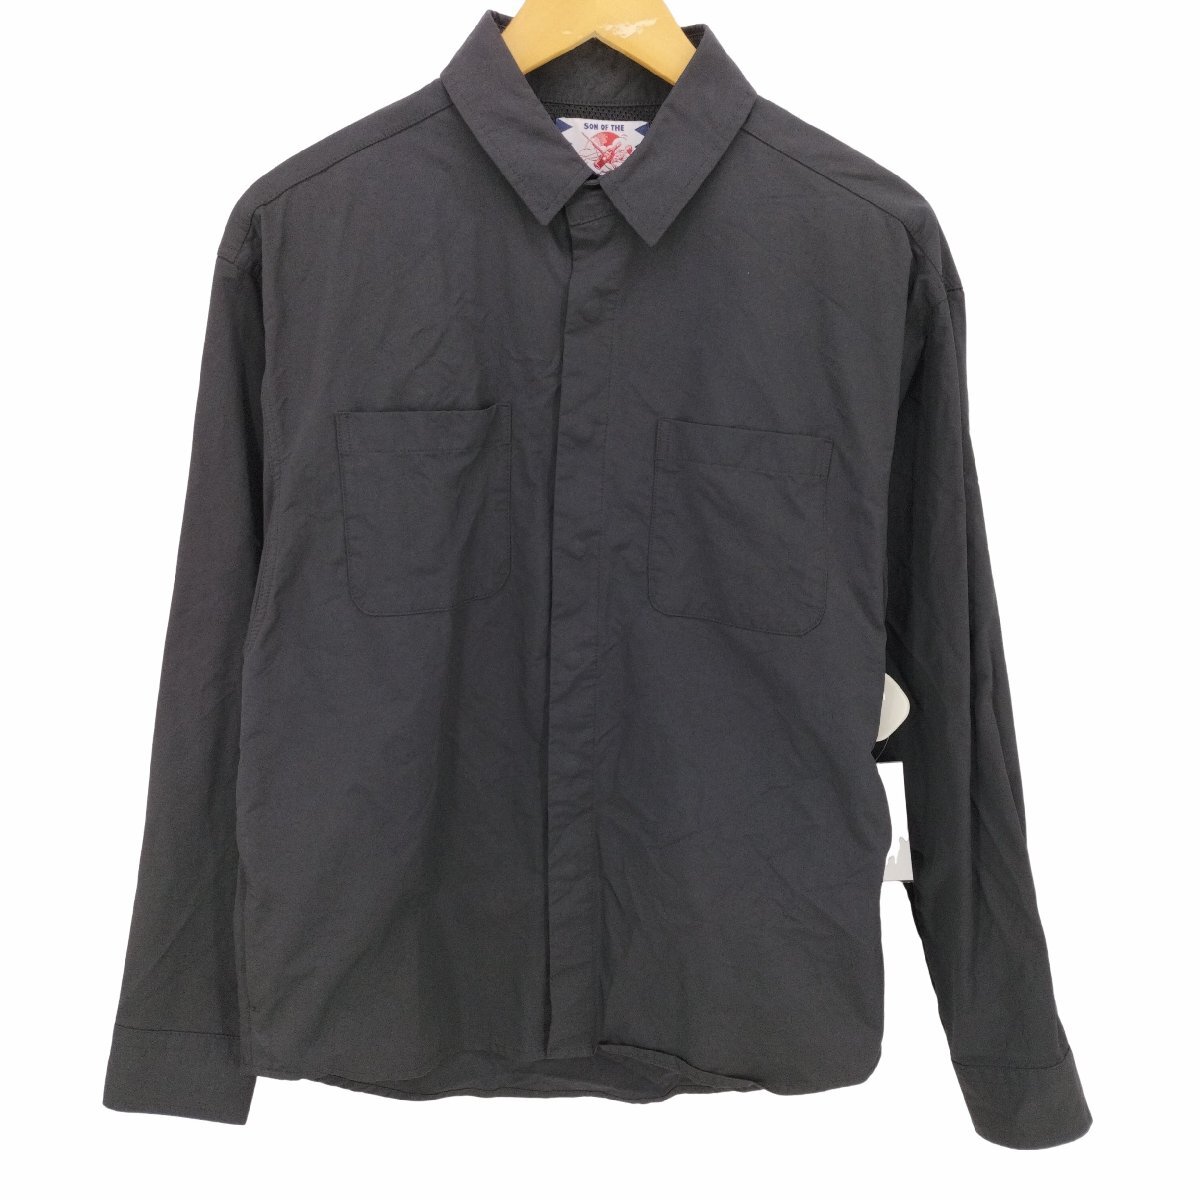 SON OF THE CHEESE(サノバチーズ) 22SS neo Ventilation Shirt 中古 古着 1056_画像1